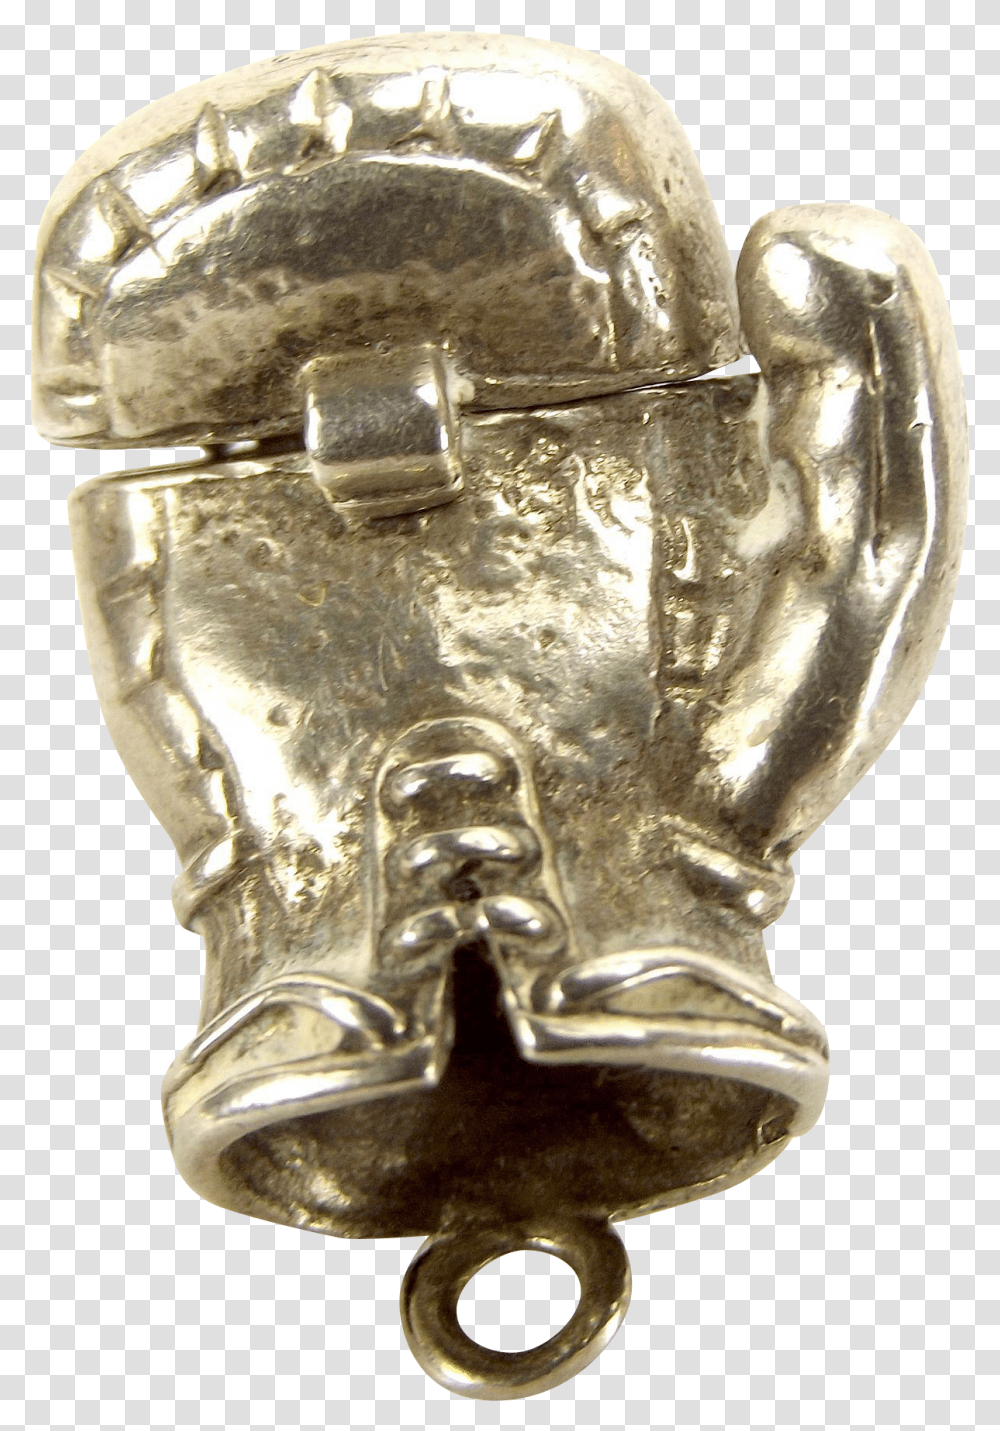 Download Vintage Silver Charm Boxing Glove Opens 2 Boxers In Antique, Helmet, Clothing, Apparel, Coin Transparent Png